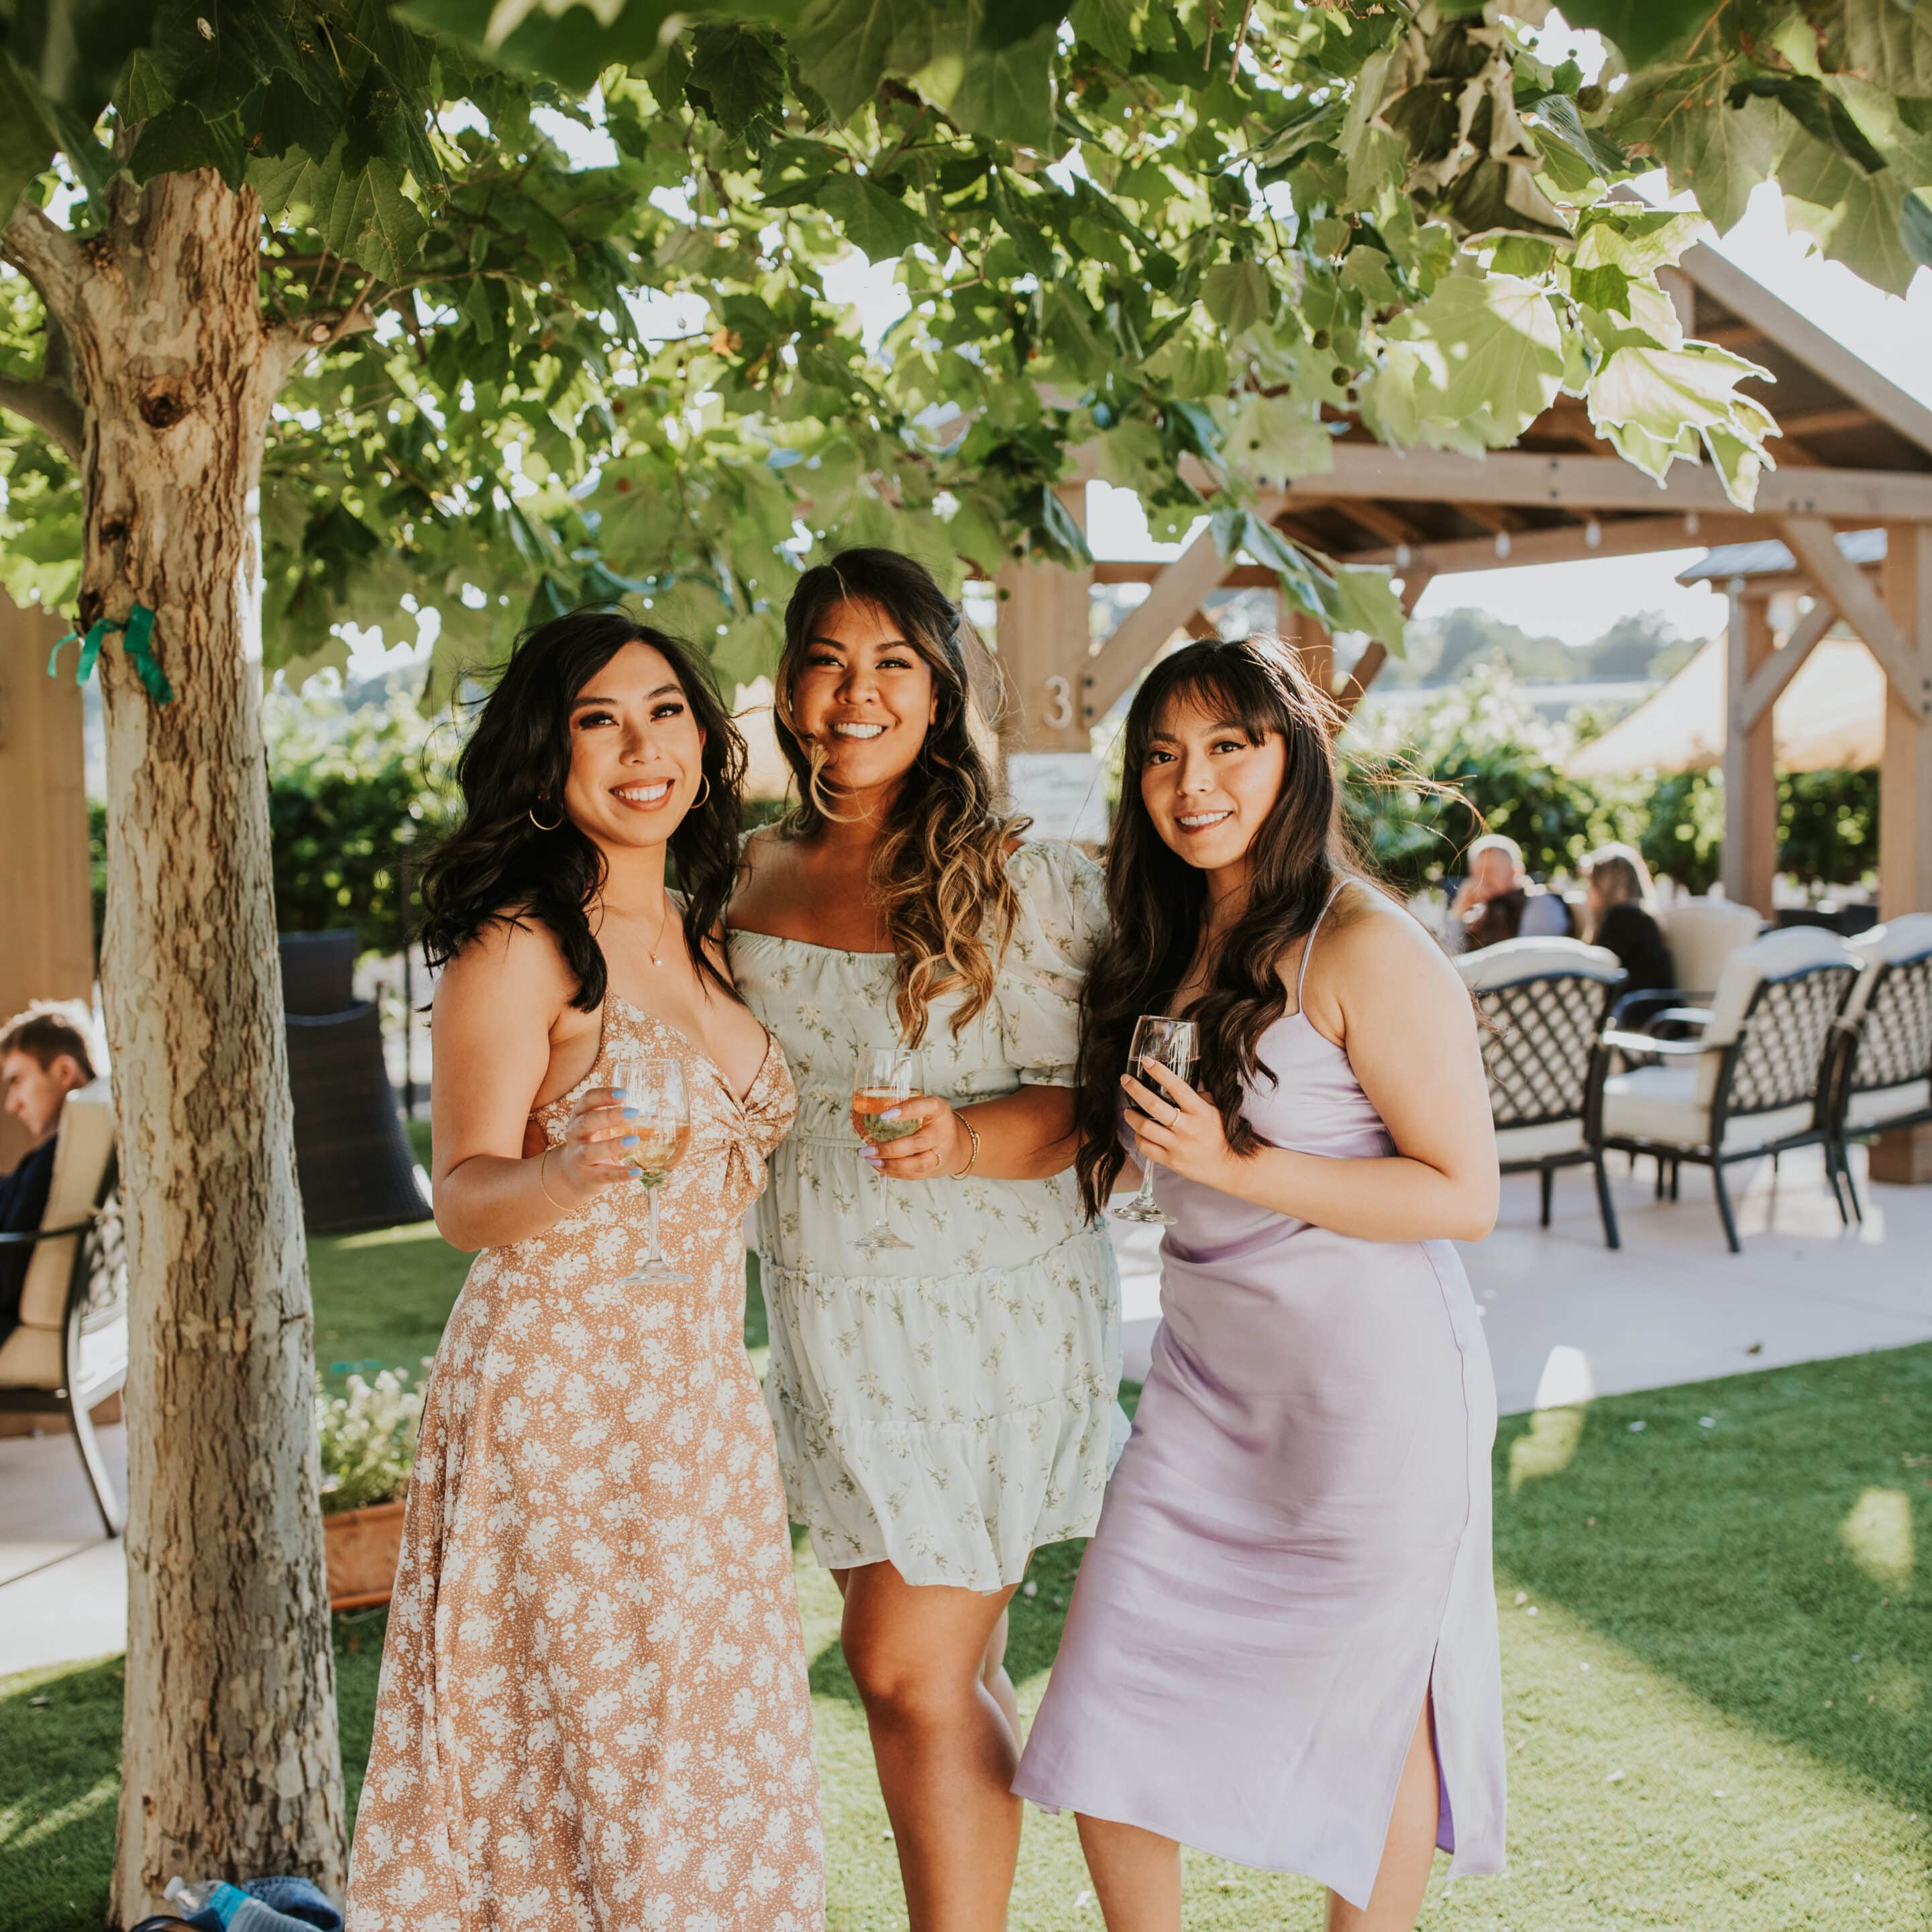 Ladies at a casual anniversary celebration raise a toast under the tree